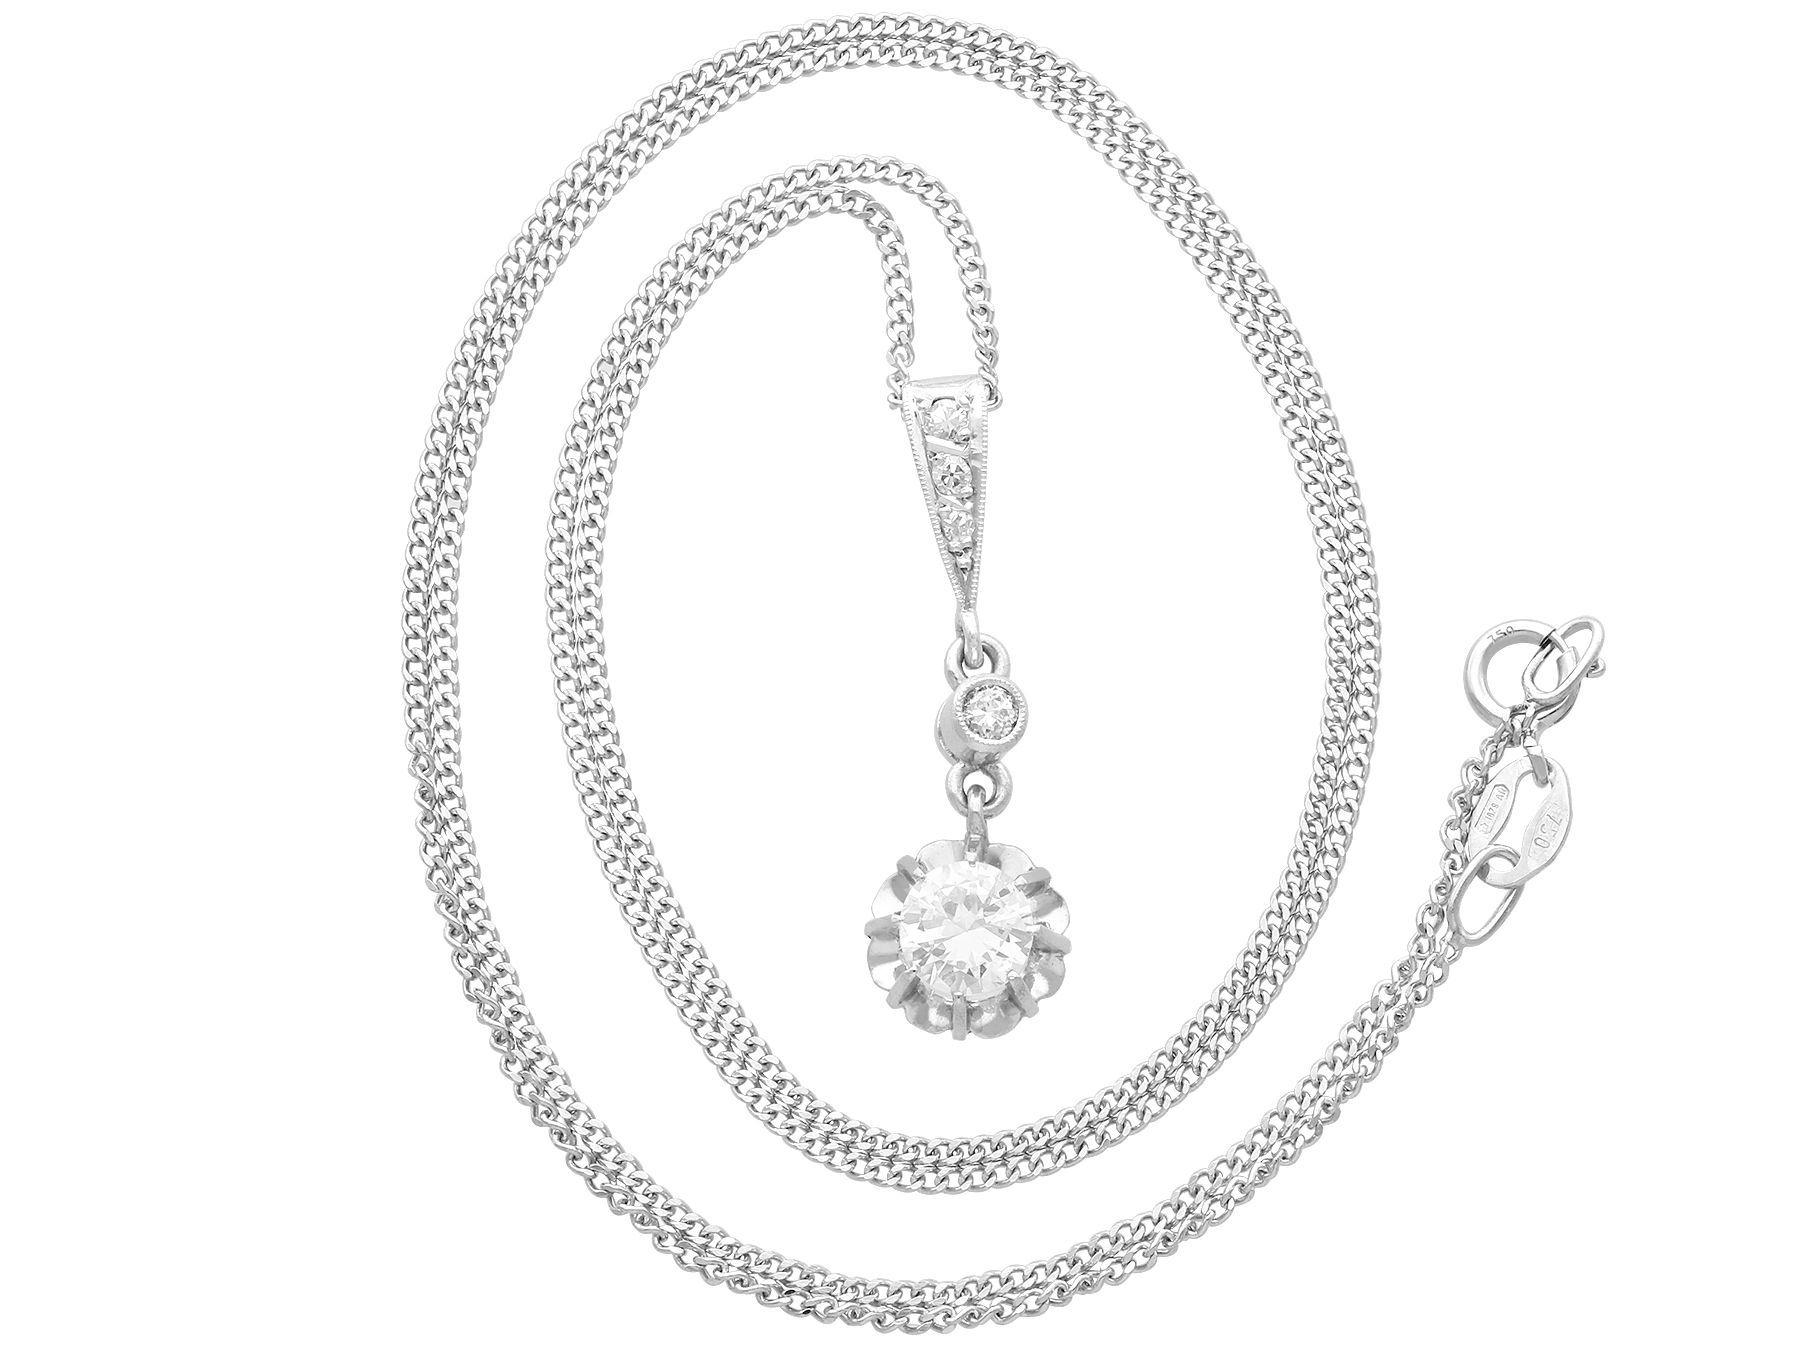 A stunning, fine and impressive antique 0.53 carat diamond and platinum pendant; part of our diverse diamond jewelry collections.

This stunning, fine and impressive antique diamond pendant has been crafted in platinum.

The drop pendant consists of